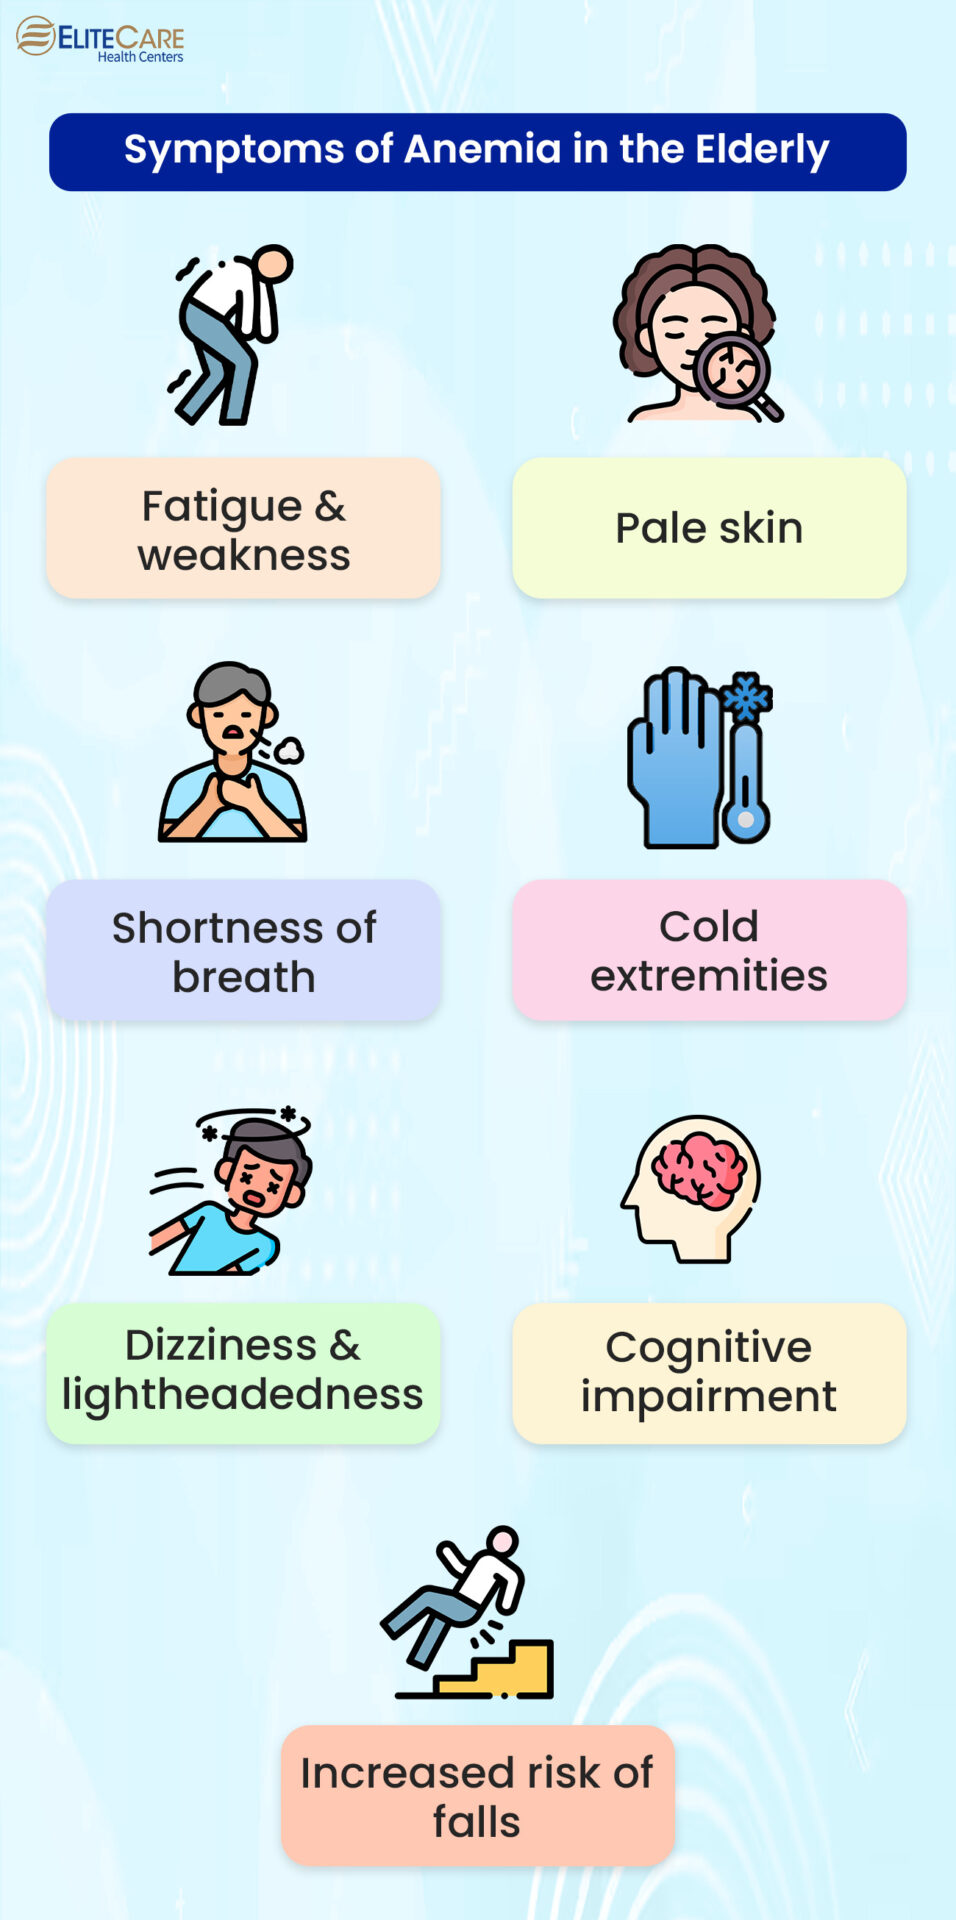 Symptoms of Anemia in the Elderly